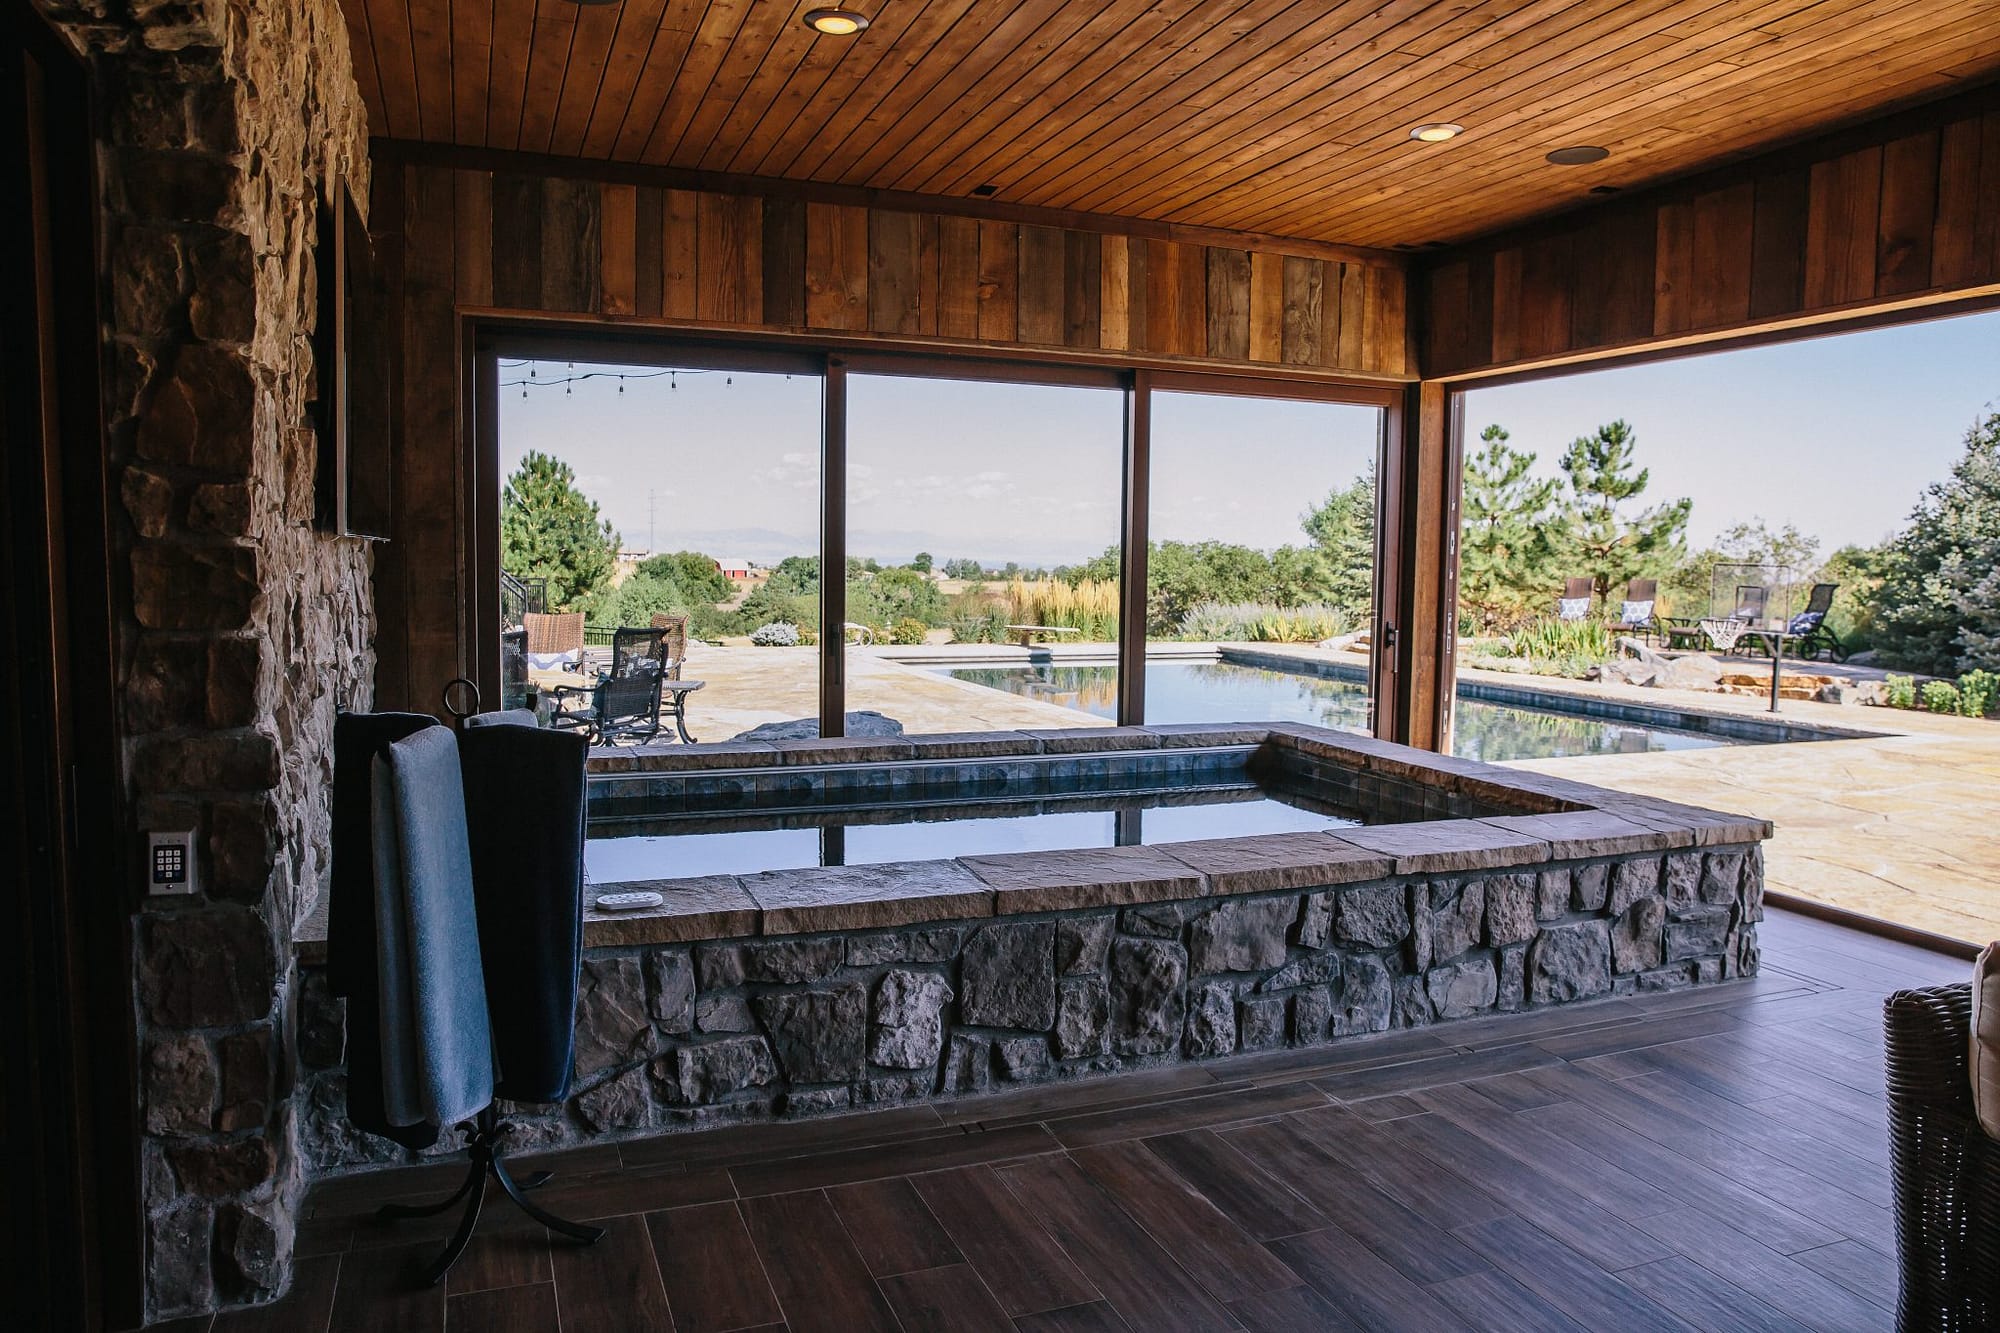 Two lift slide doors open the hot tub area to the patio and pool